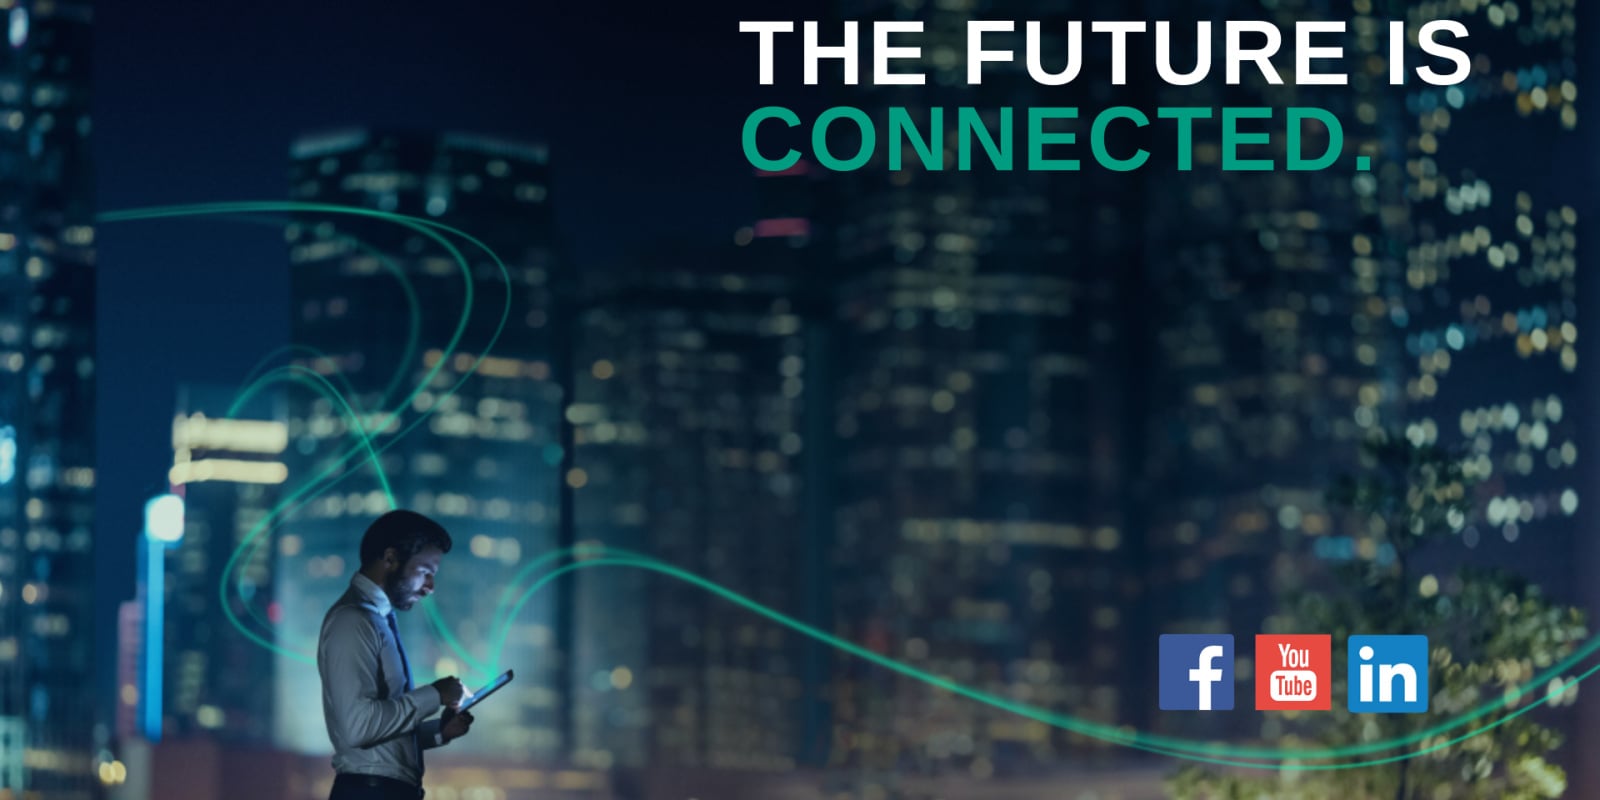 The future is connected - social media